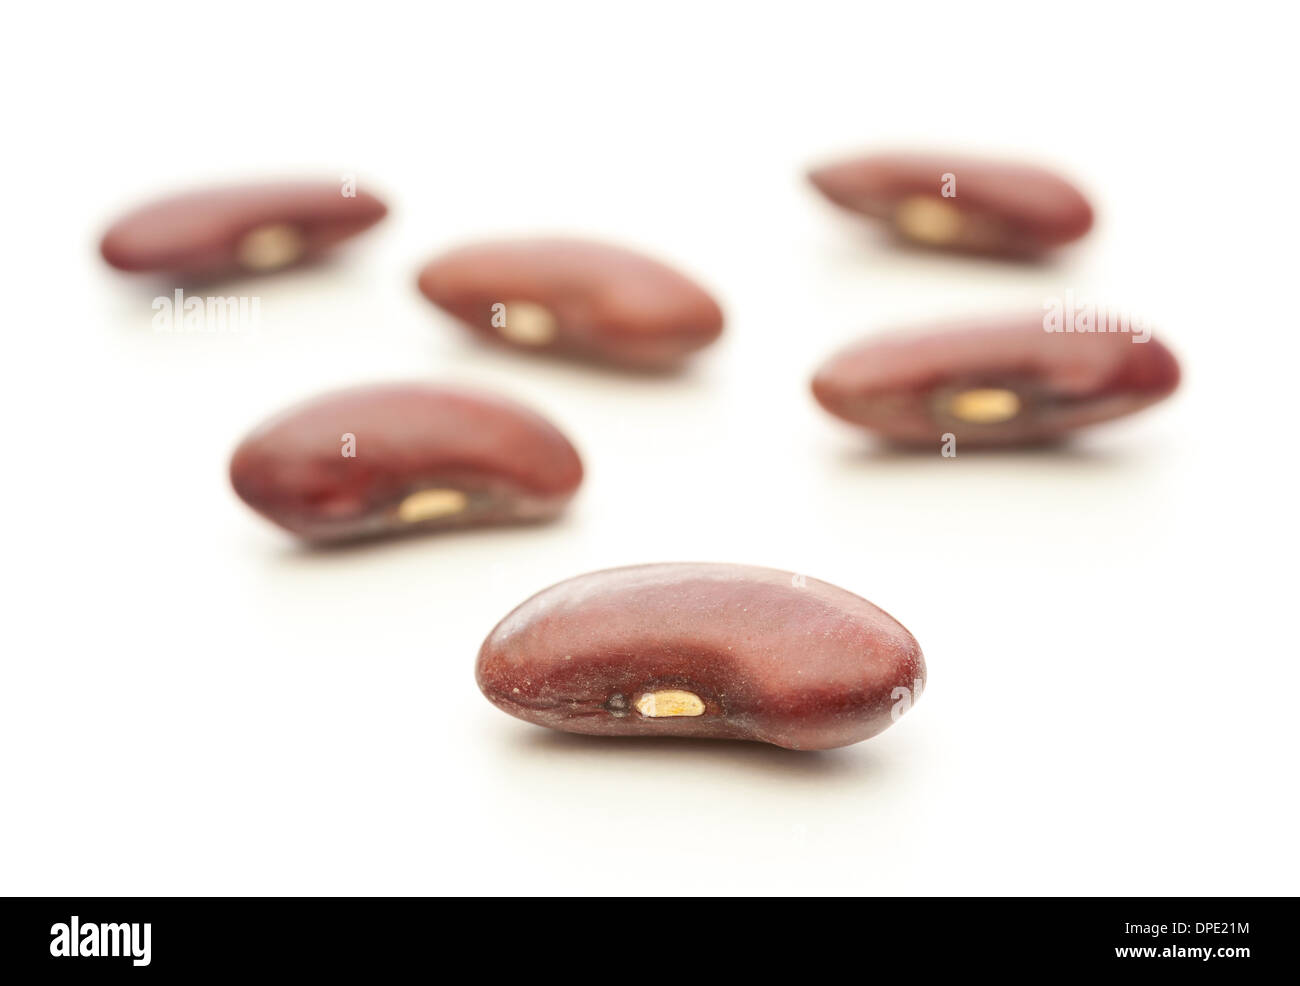 Kidney beans on a white background Stock Photo